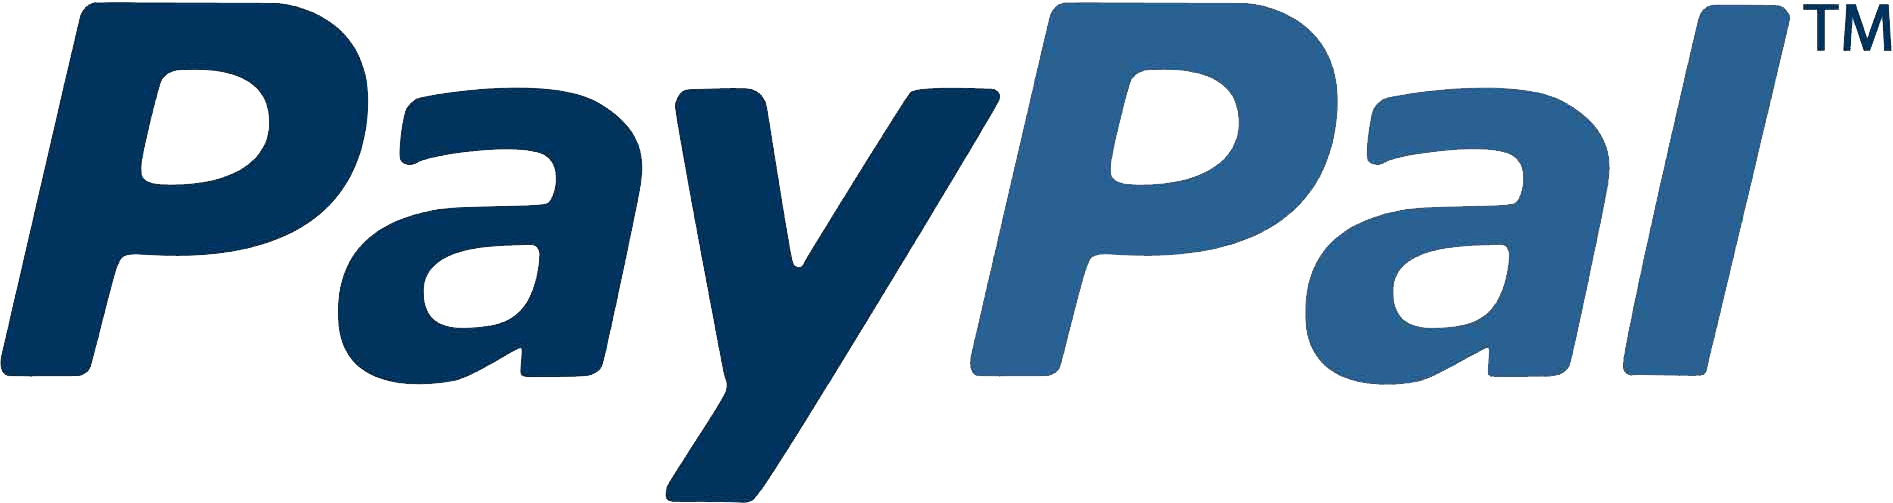 paypal logo text blue png #2132